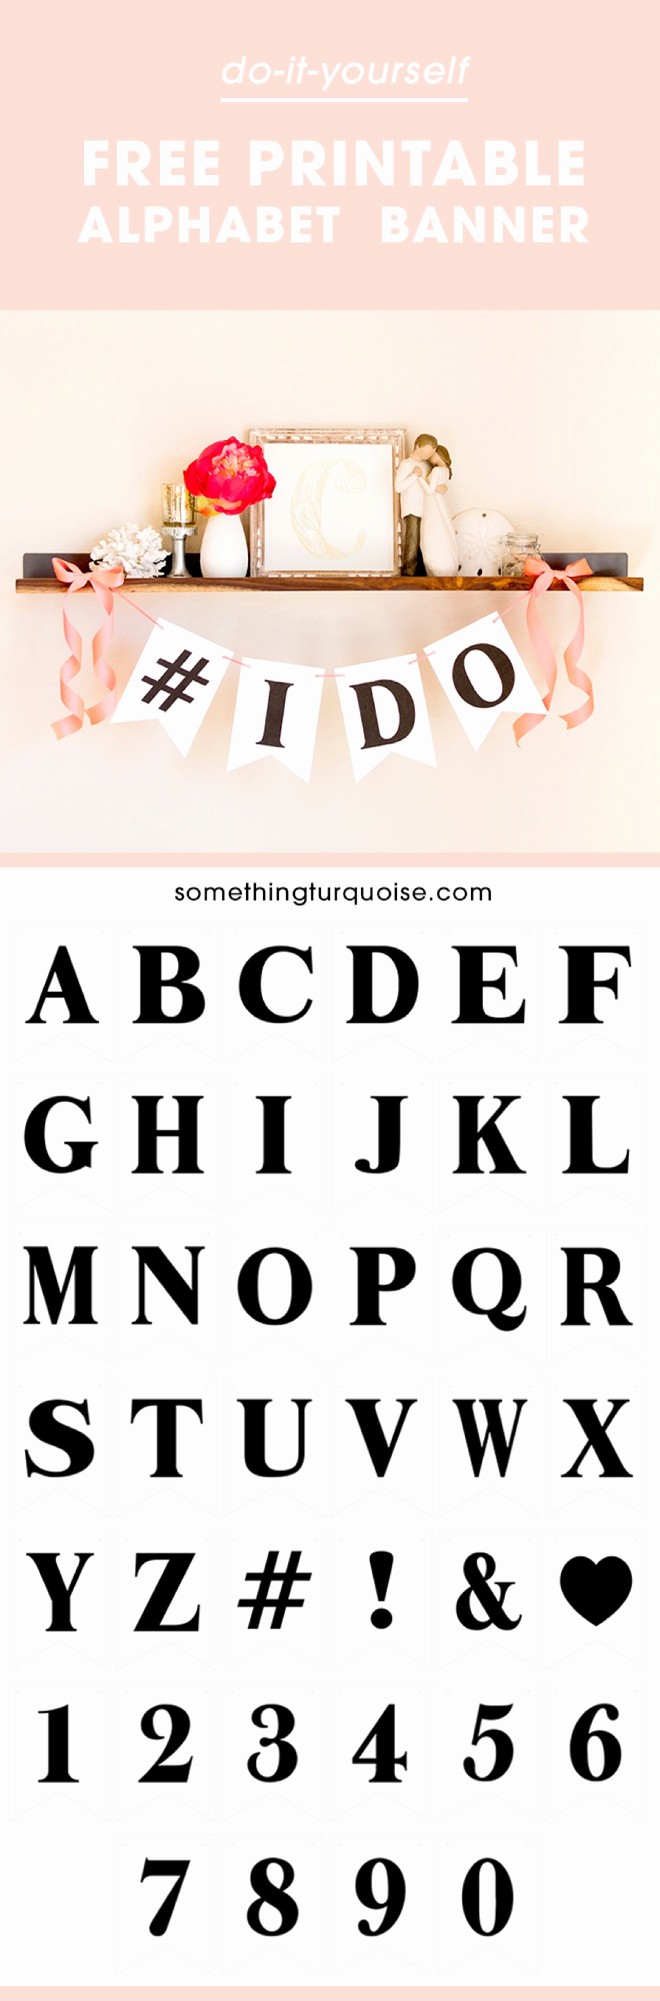 How to Make Banner Letters Lovely Free Printable Alphabet and Number Banner Adorable